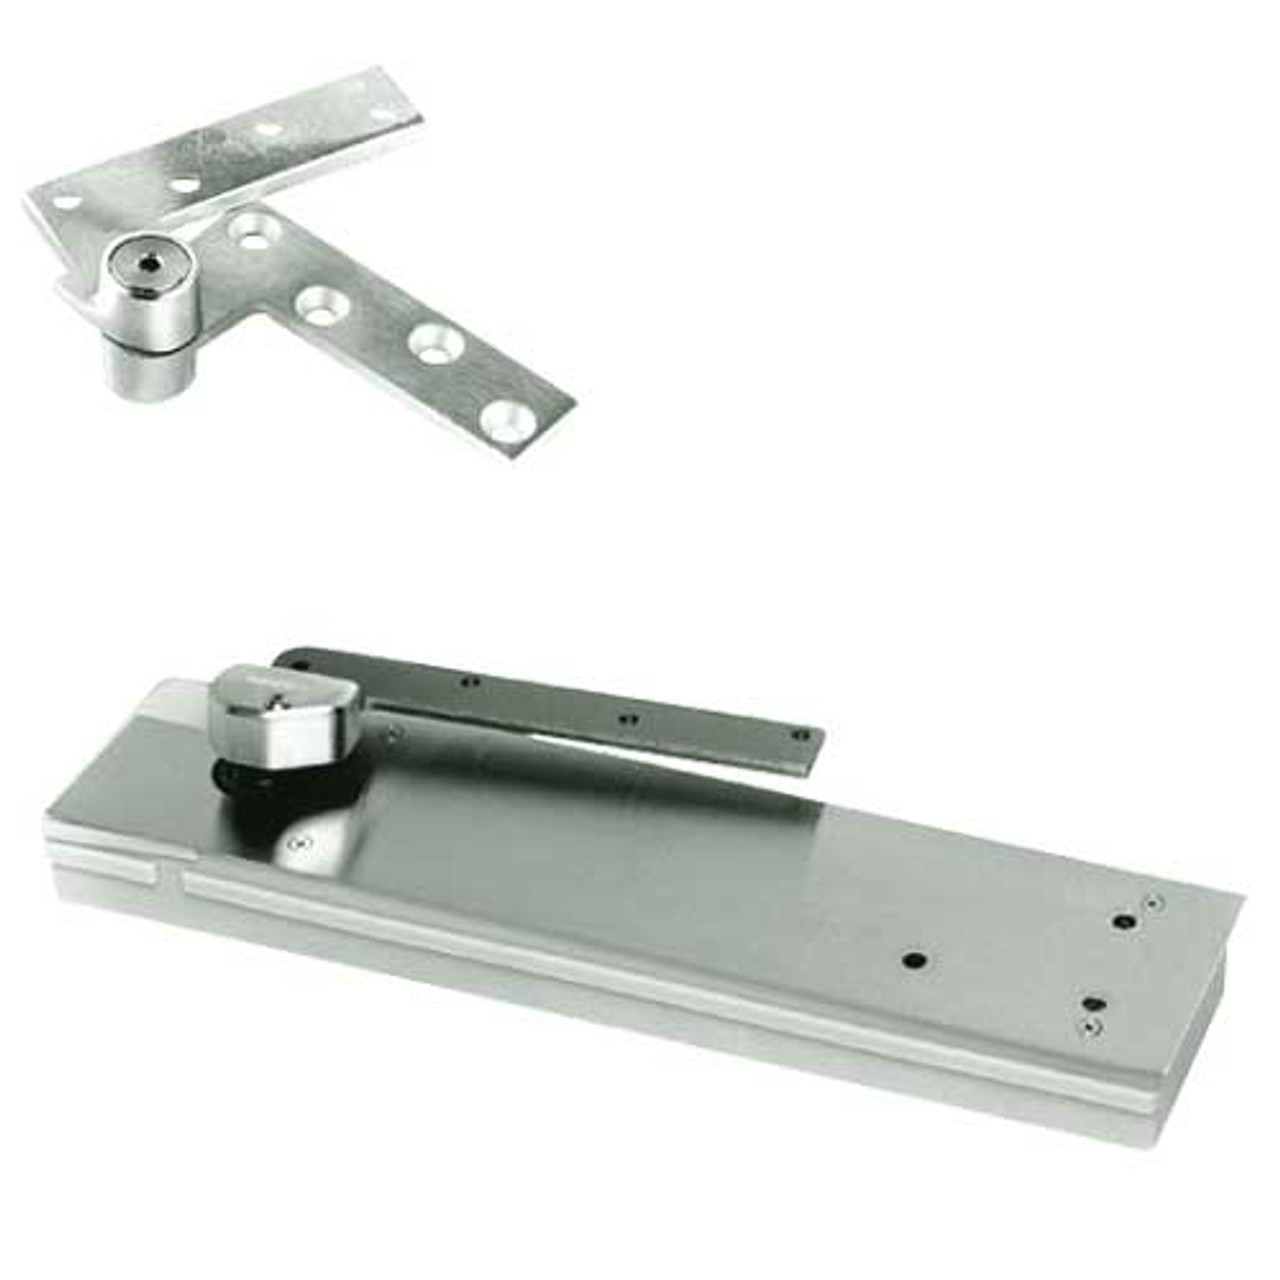 5103ABC105-LH-618 Rixson 51 Series 3/4" Offset Hung Shallow Depth Floor Closers in Bright Nickel Finish